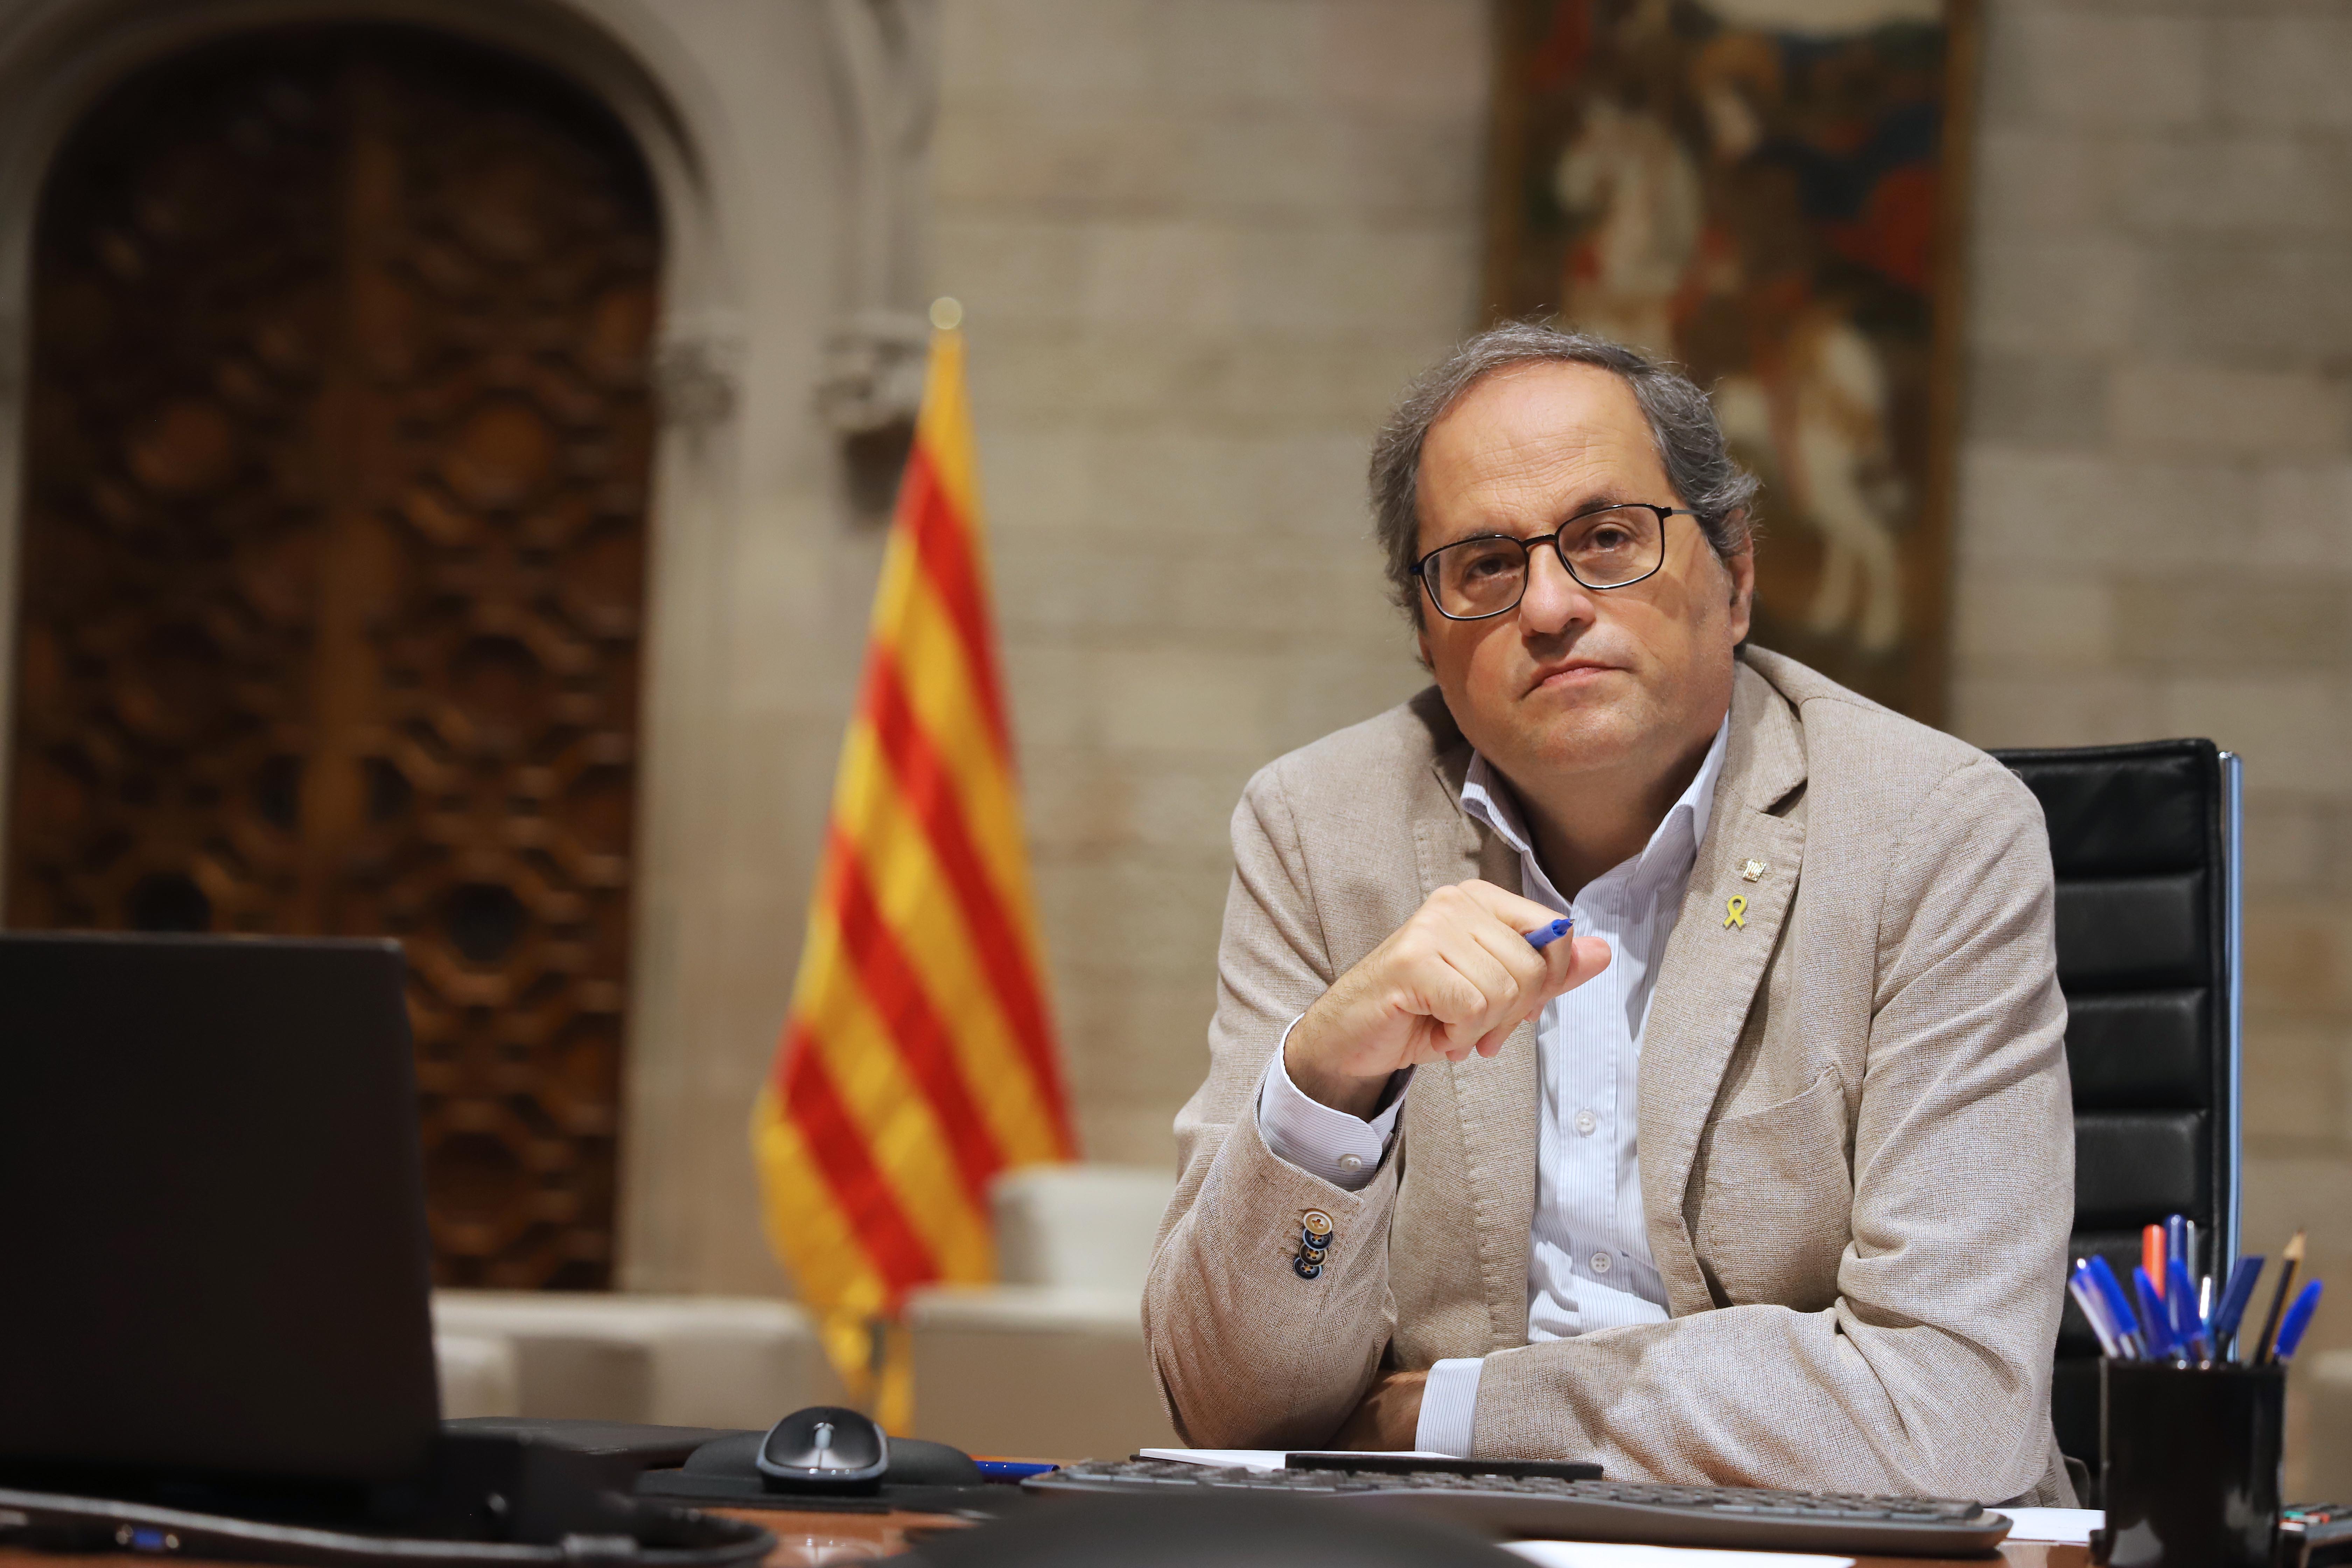 Coronavirus in Catalonia: "A much greater effort is needed", says Torra